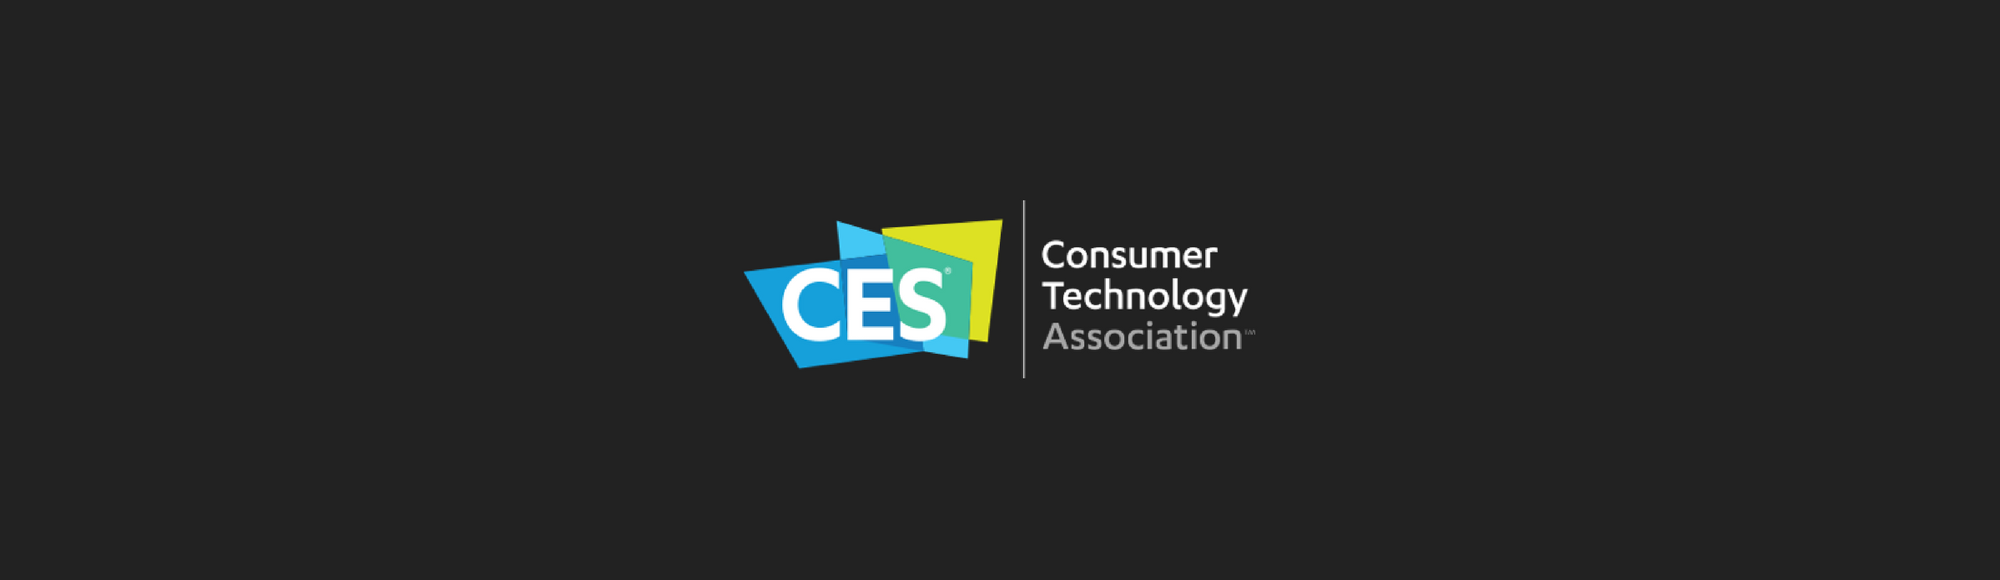 4 Trends from CES 2018 and What They Mean for Your Retail Business